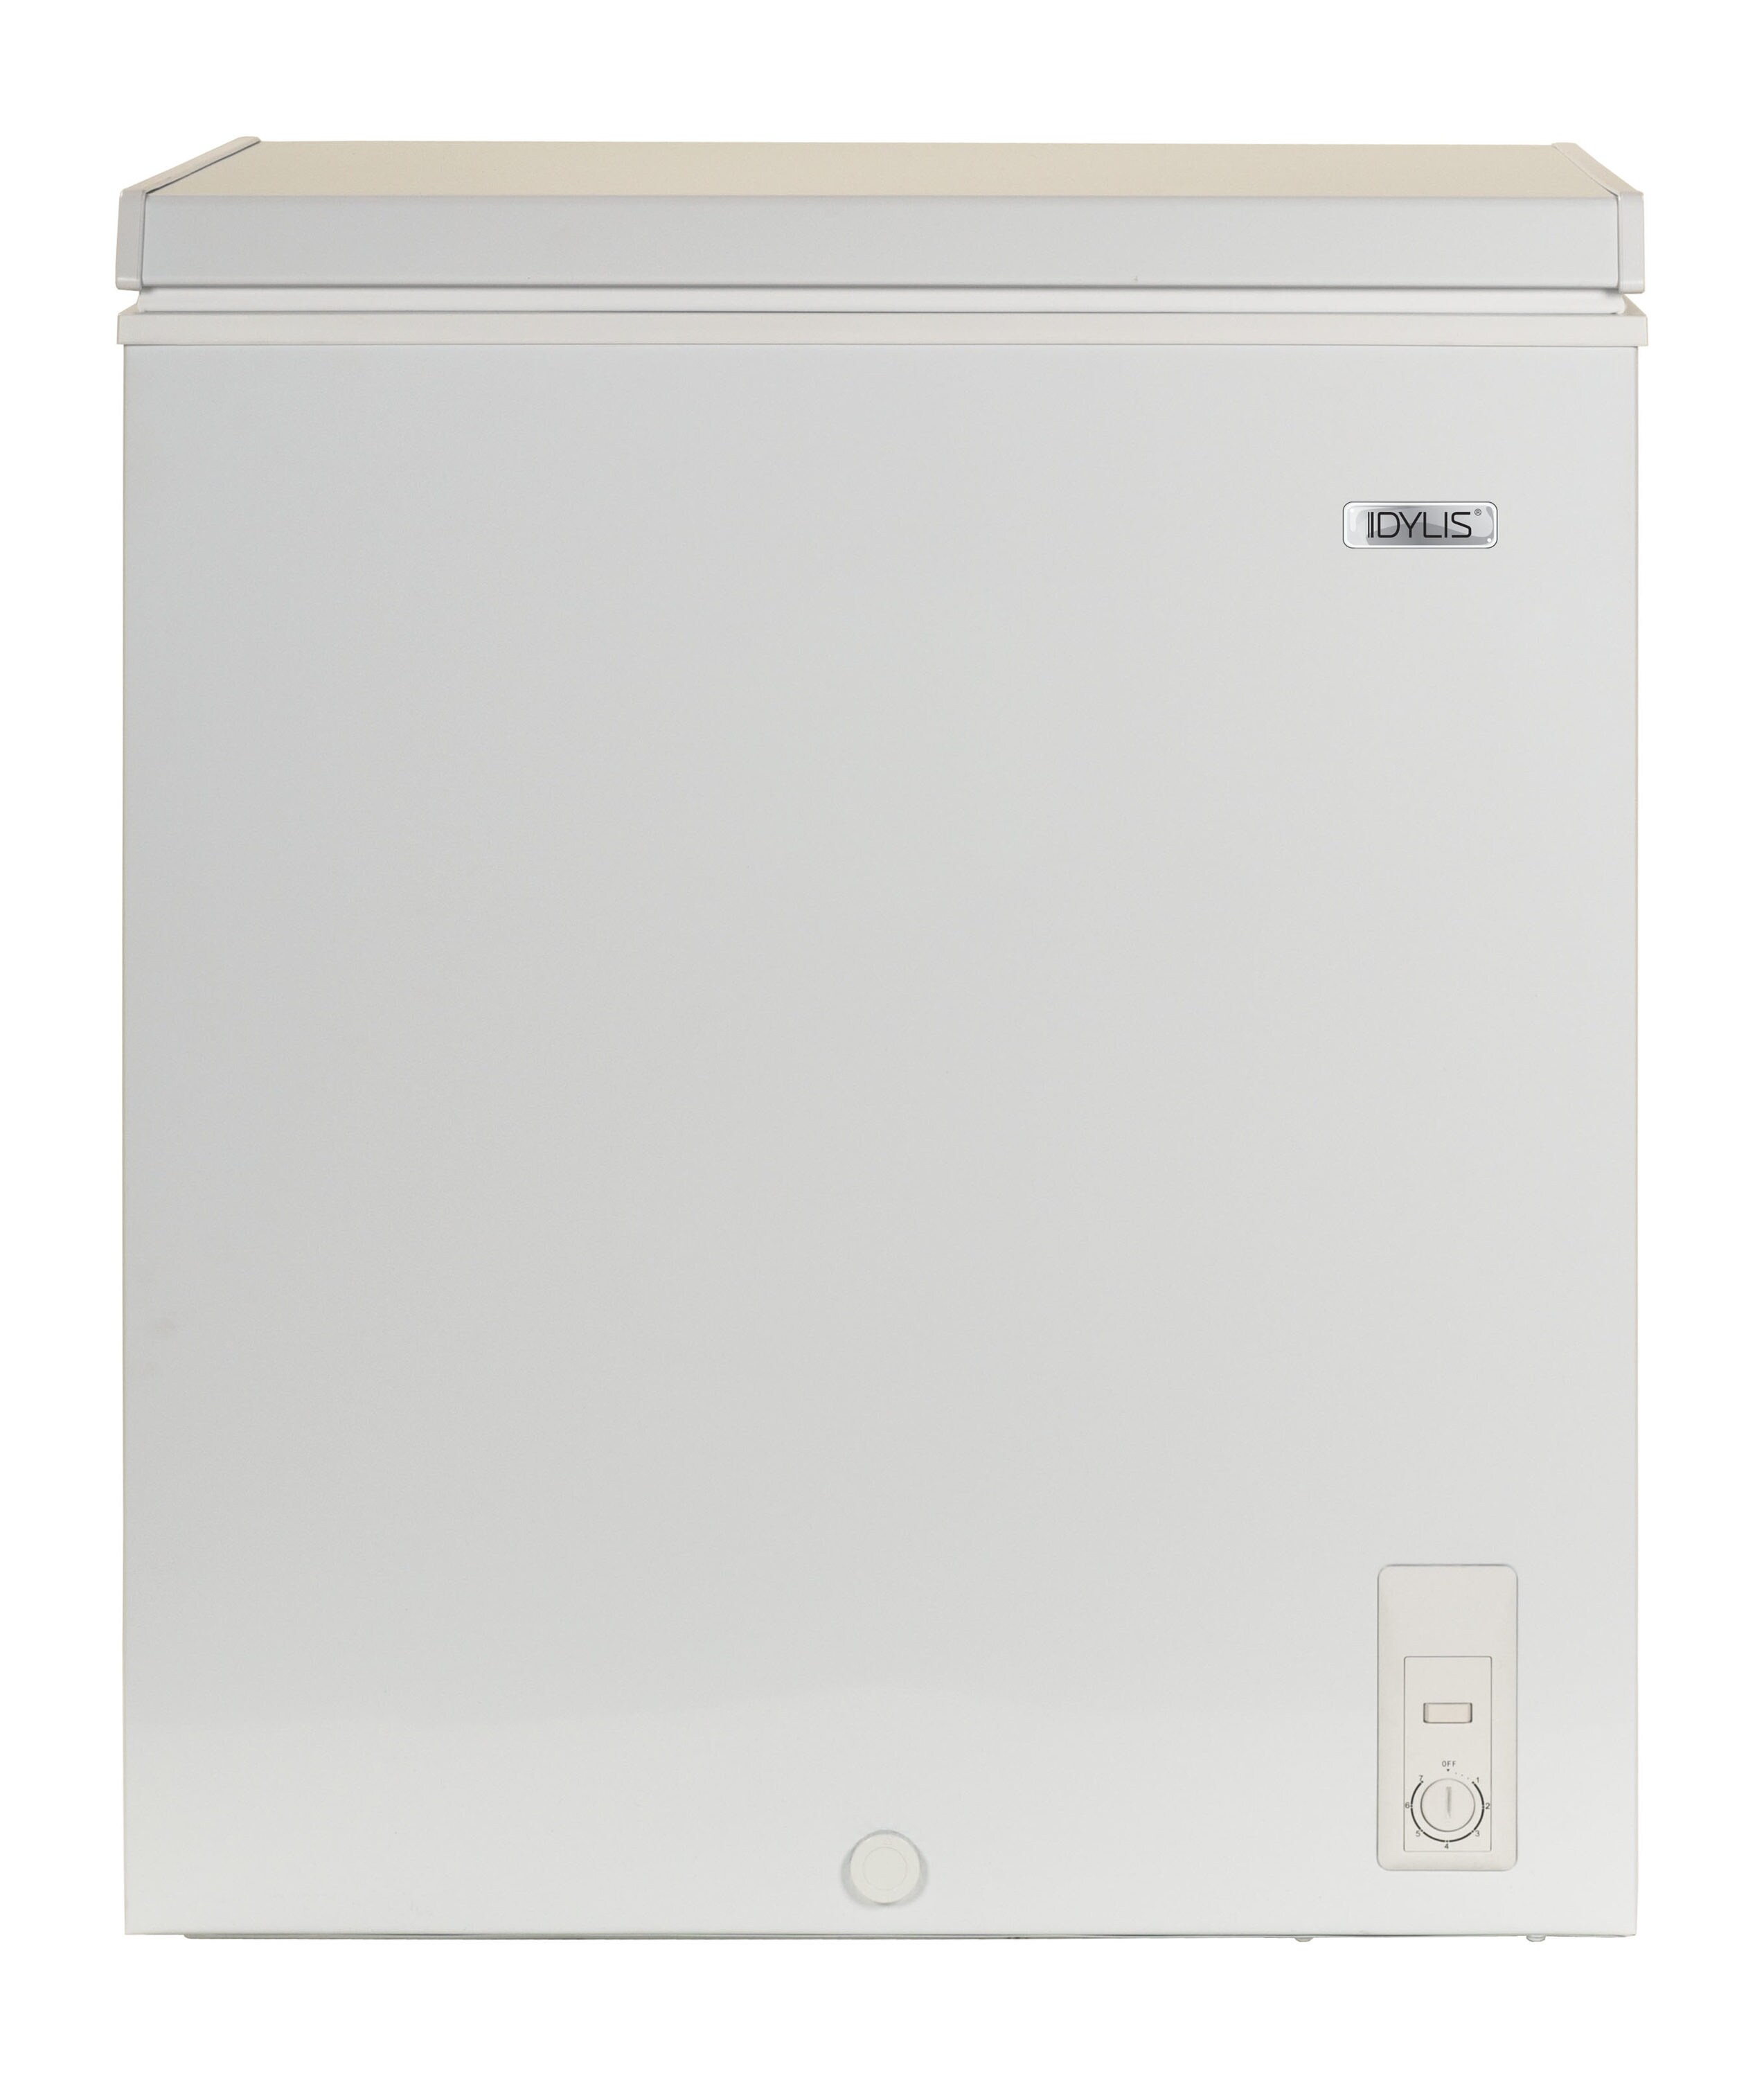 White freeze. Haier hf300wg. Kismile 7.0 Cubic feet Chest Freezer with Removable Basket.